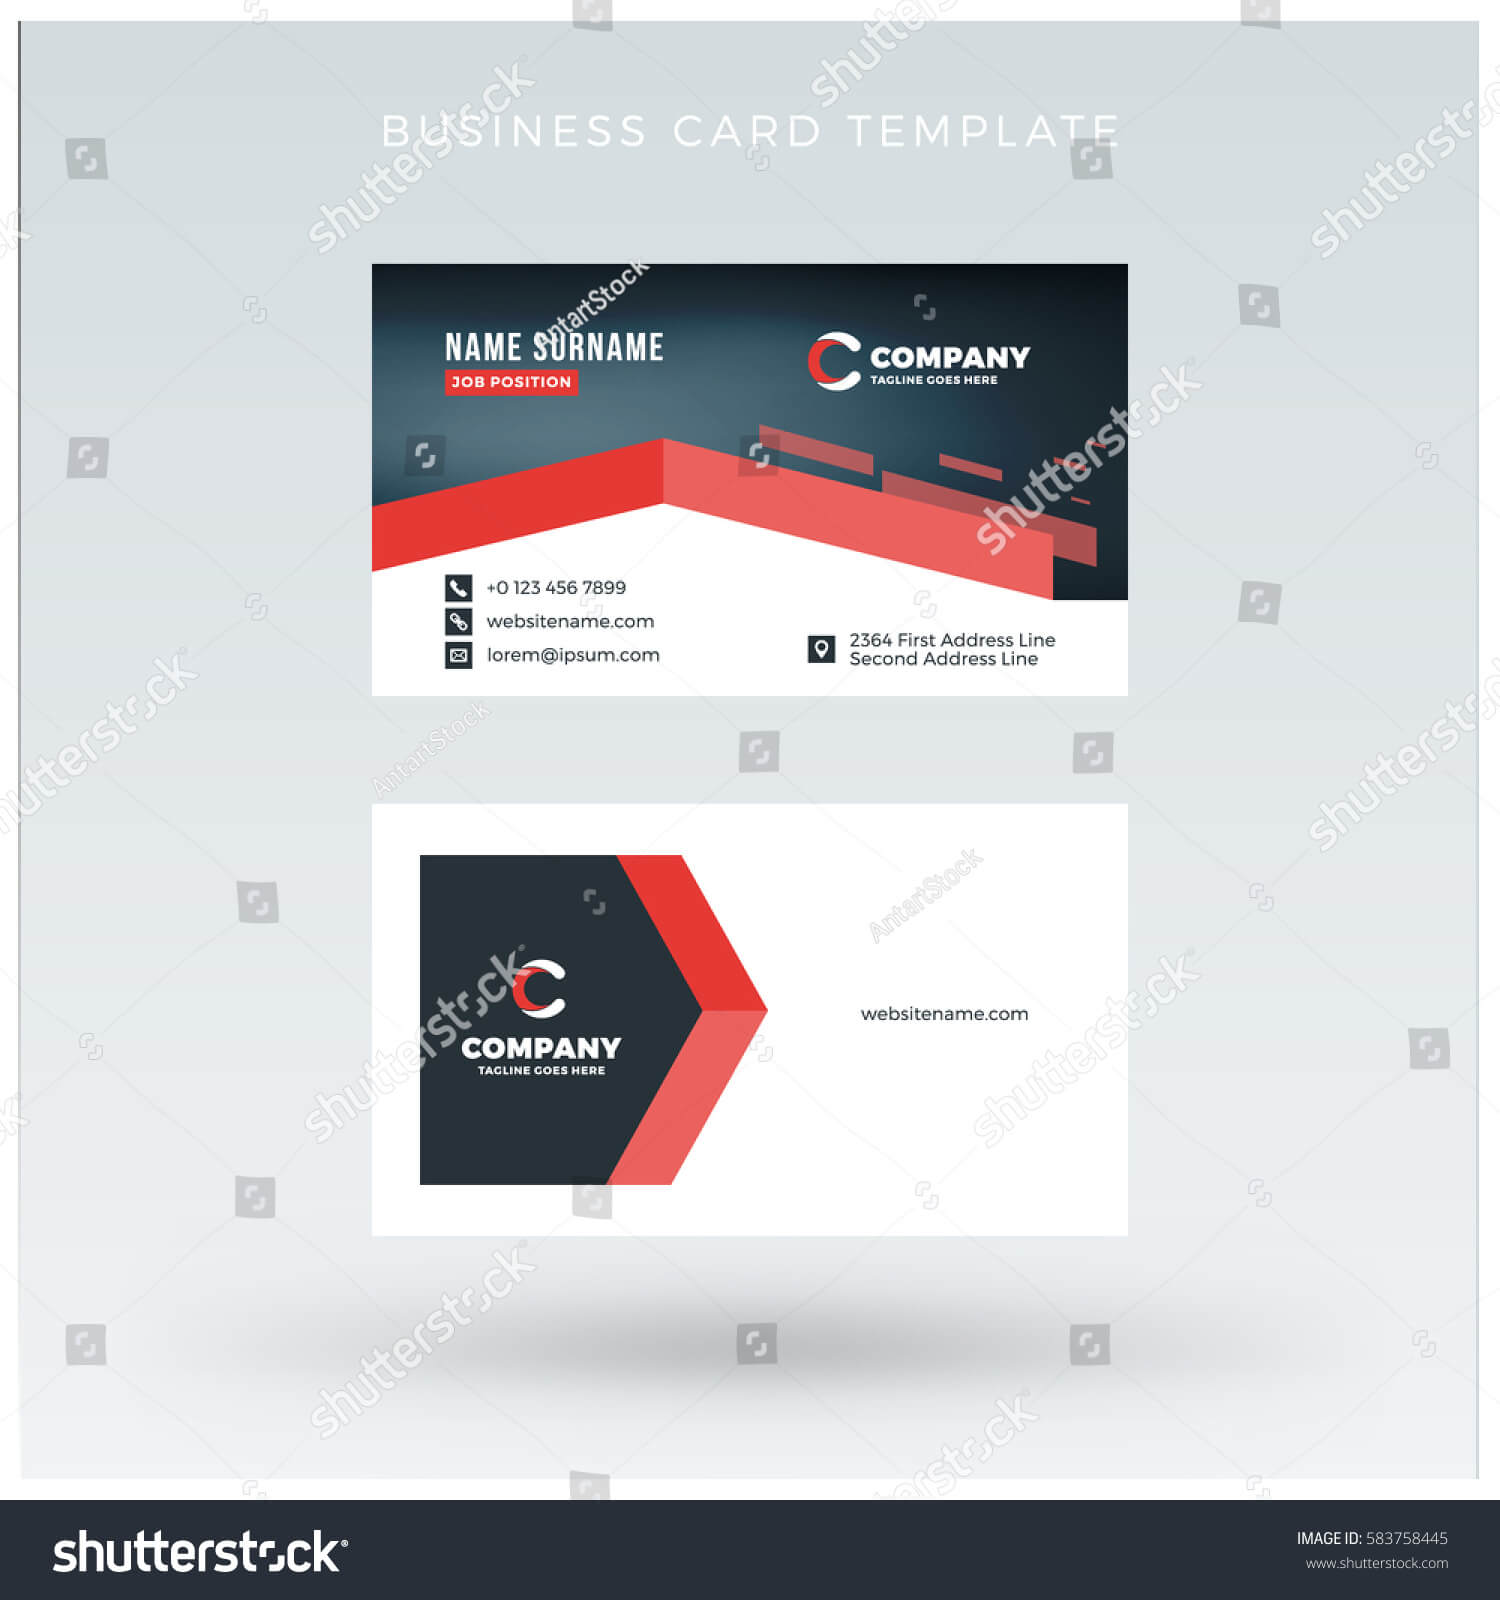 Double Sided Business Card Template Illustrator ] – Double With Regard To Double Sided Business Card Template Illustrator